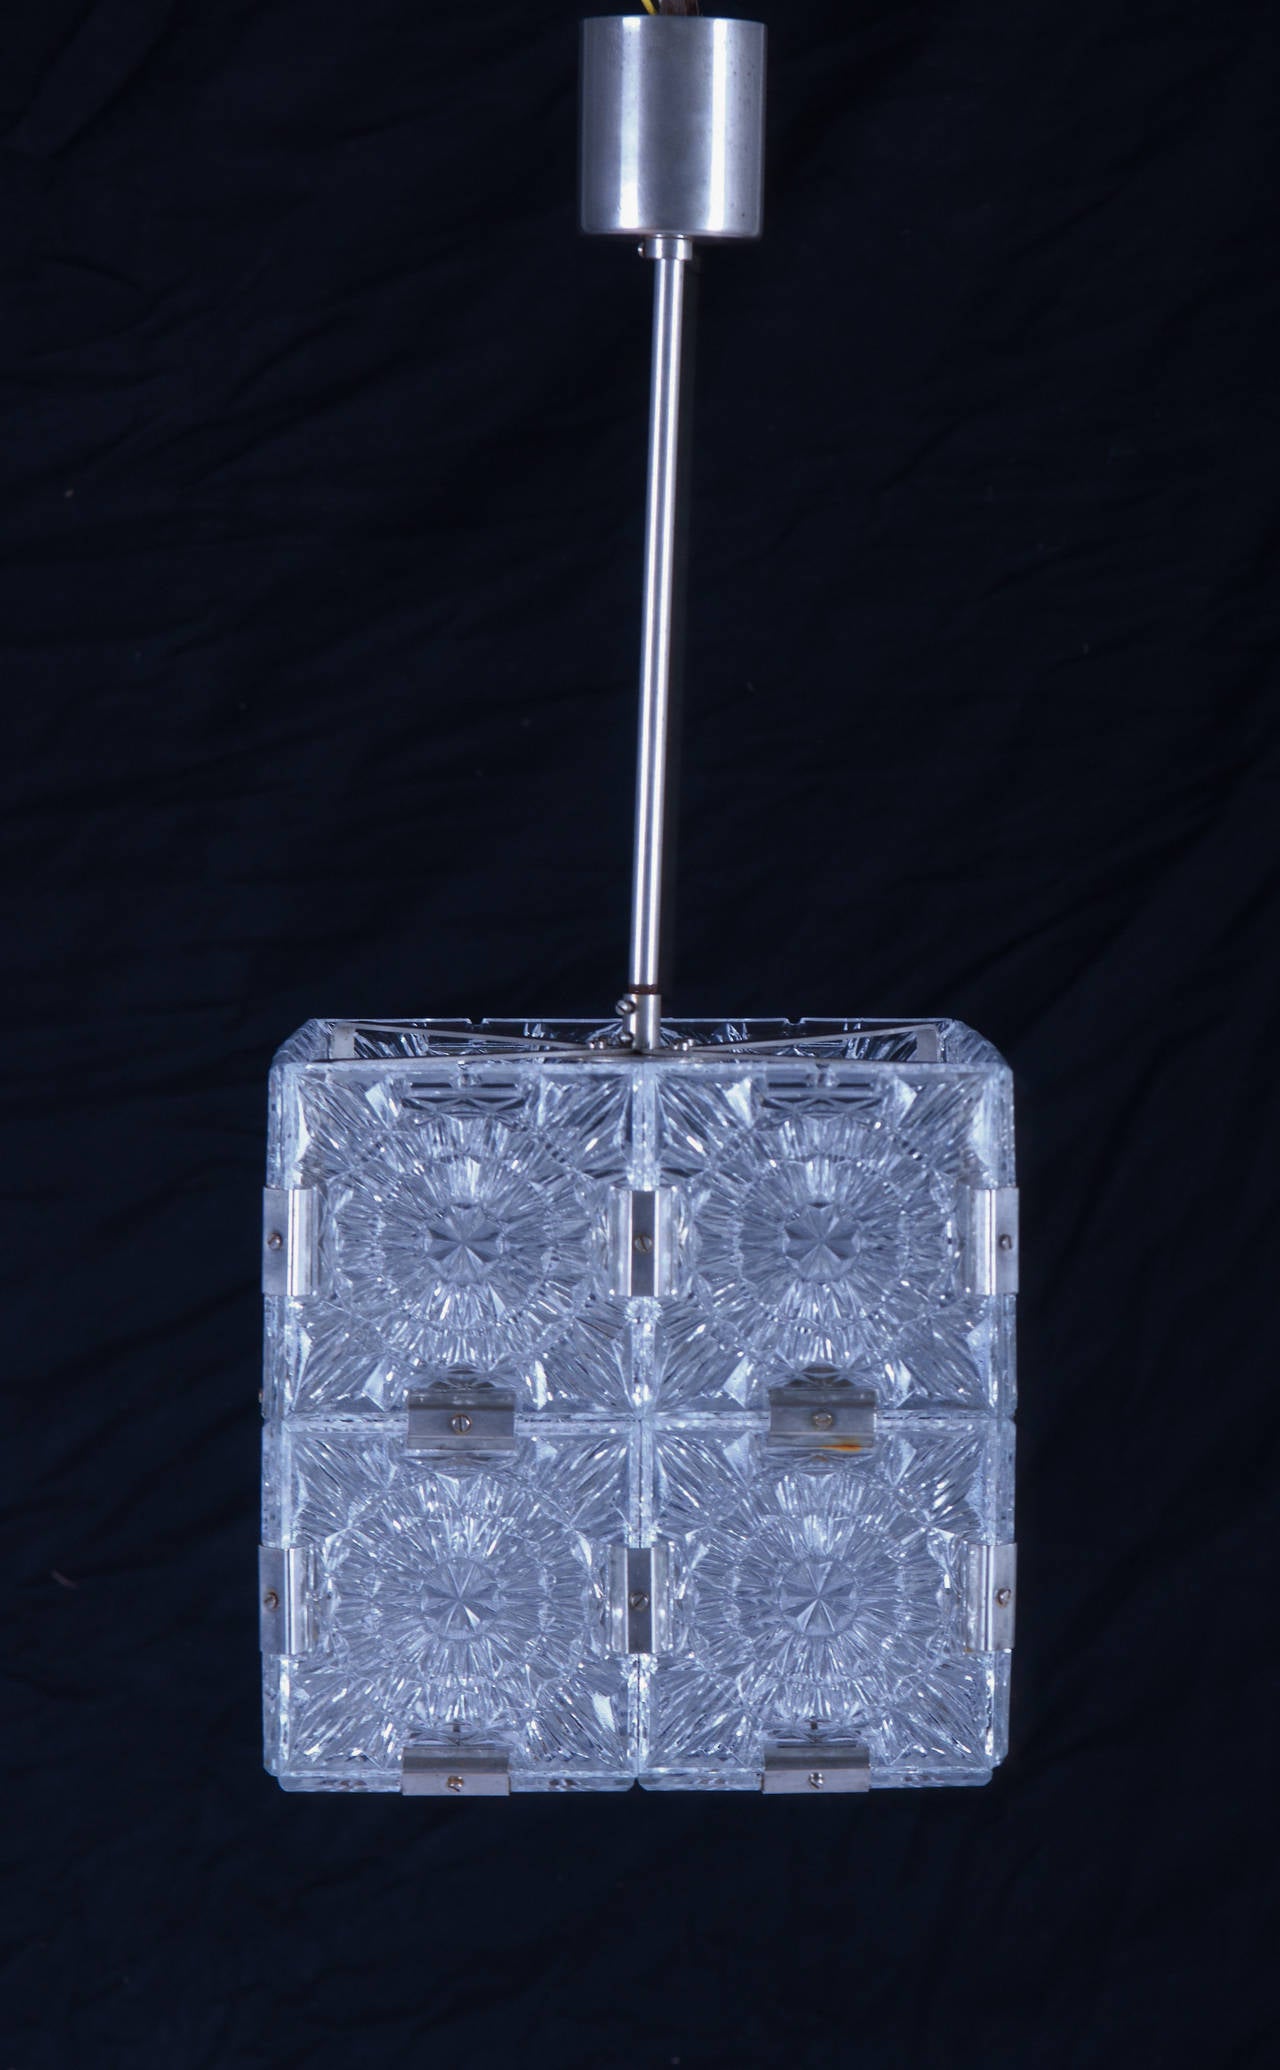 Mid-Century Cube Form Pendant Ceiling Fixture Featuring Etched Glass By Kalmar form 1960's
8 pieces available